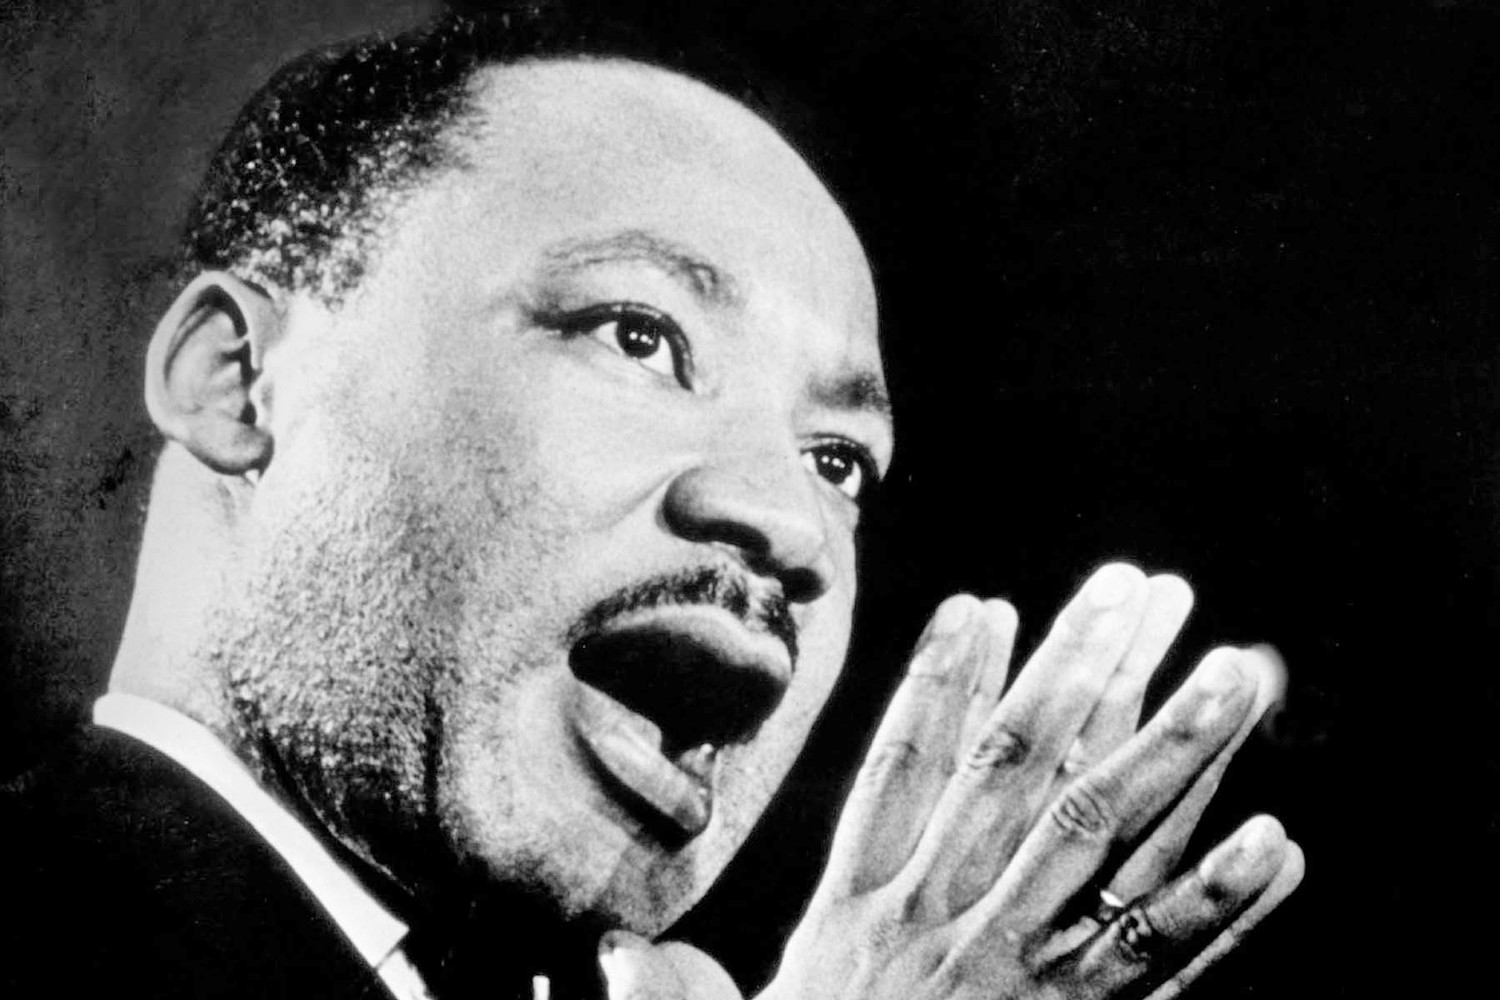 The Rev. Martin Luther King Jr. is pictured in an undated file photo. The 50th anniversary of the civil rights leader’s assassination is April 4.